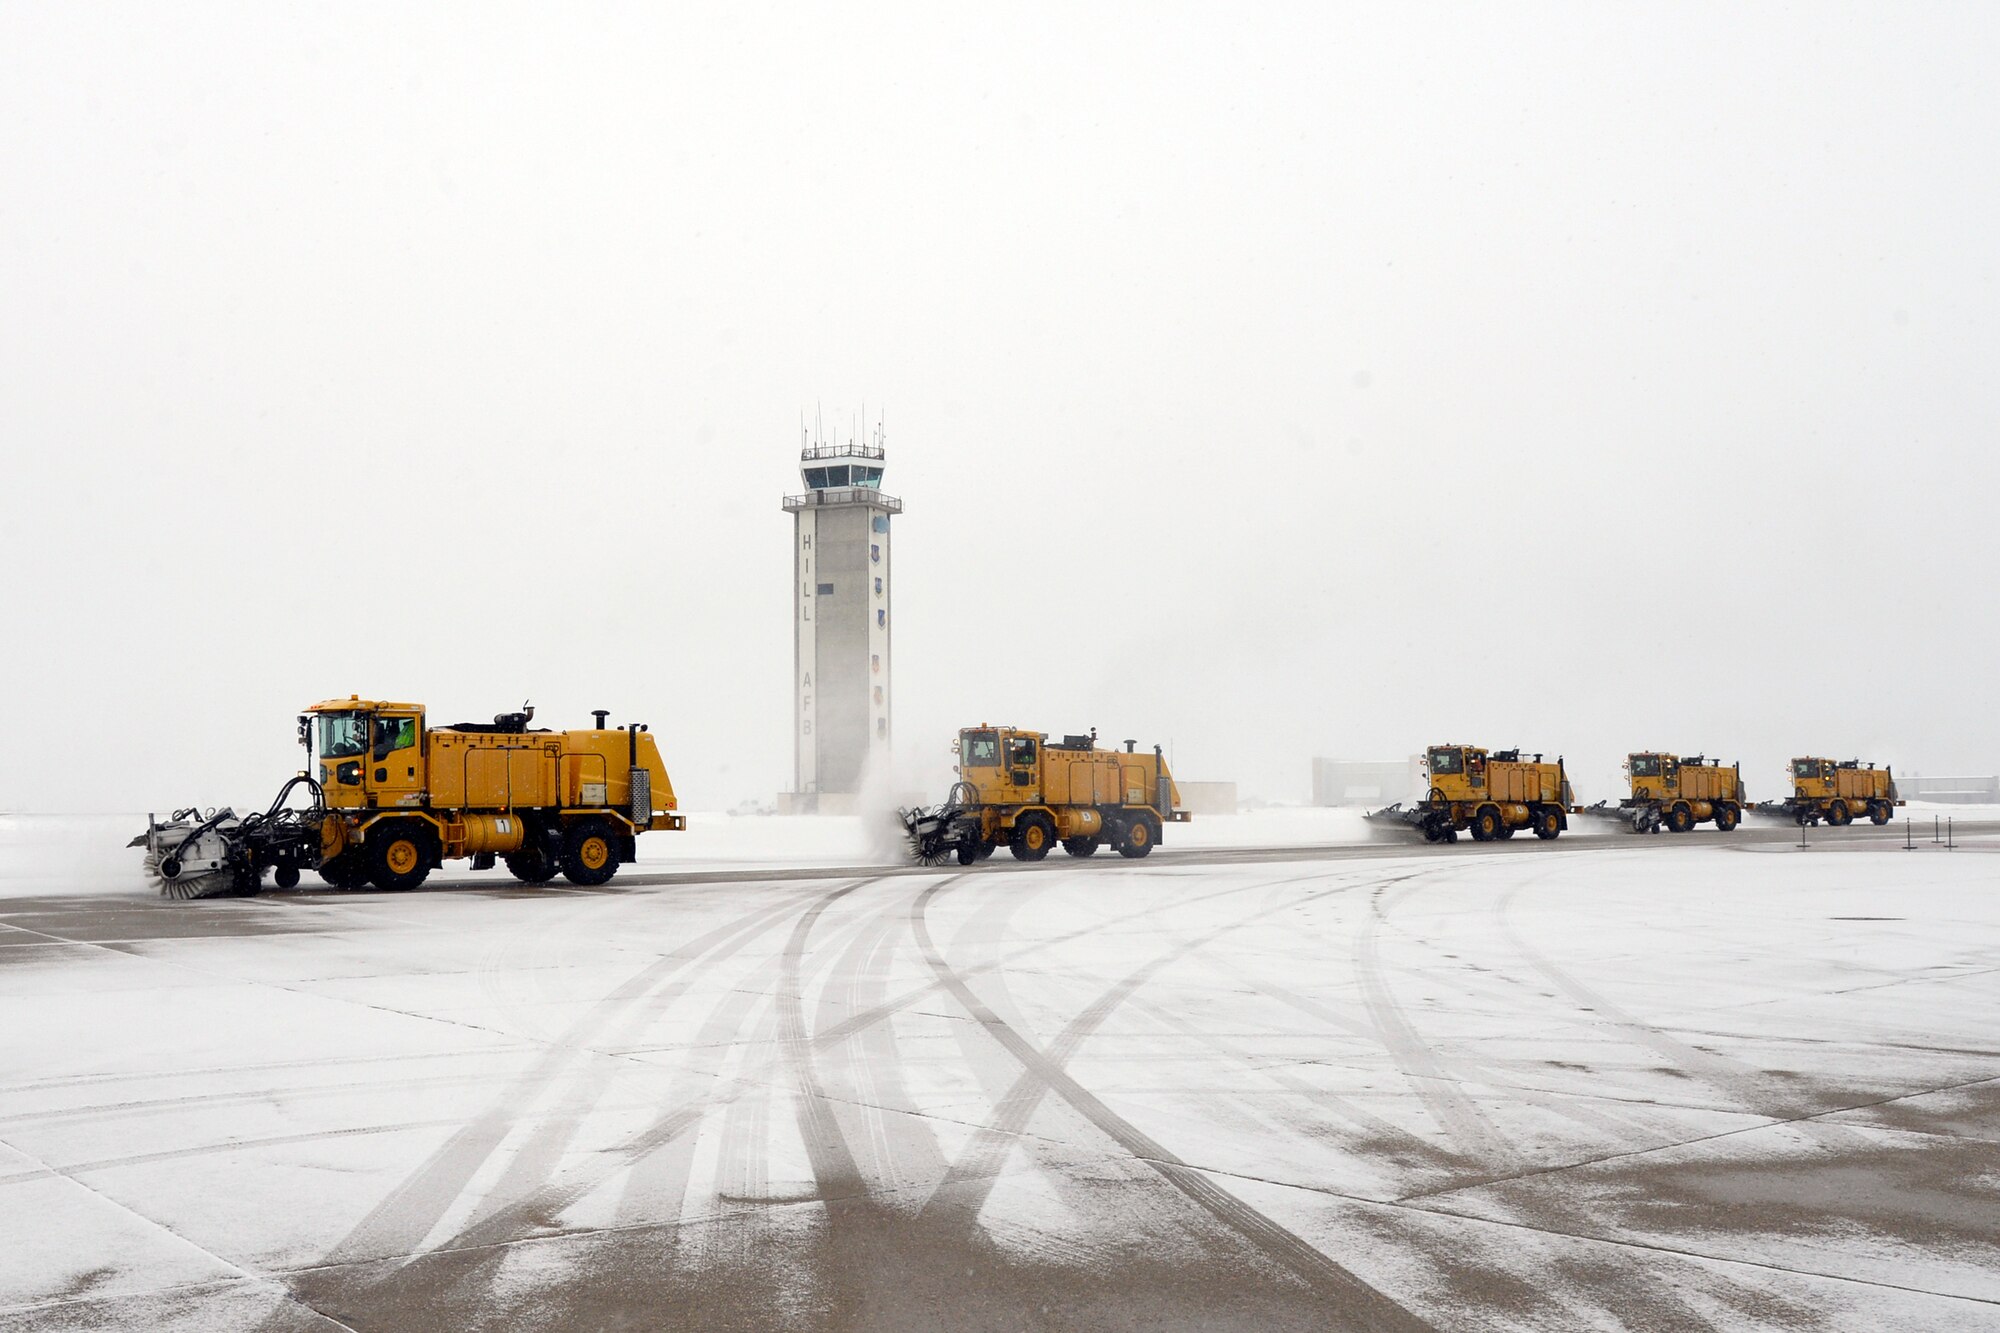 High-capacity sweeper vehicles clear the Hill Air Force Base taxiway of snow, Dec. 1, 2016. During the winter season from Nov. 1 through April 1, the snow removal team has 70 employees who work 24/7, operating 65 pieces of snow-removal equipment to remove 65-70 inches of snow each year. (U.S. Air Force photos by Todd Cromar)